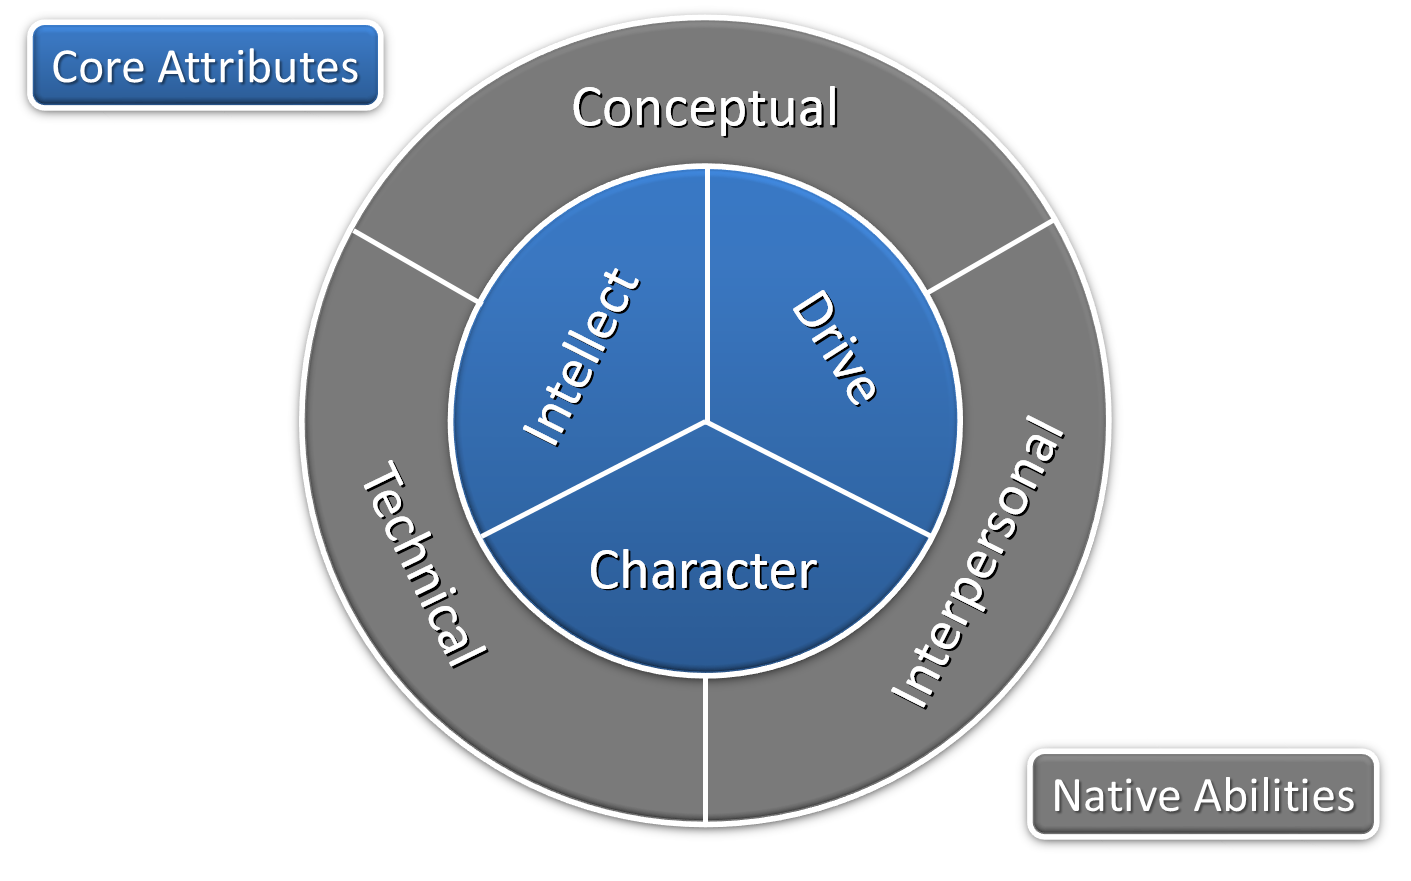 The Whole Consultant Model